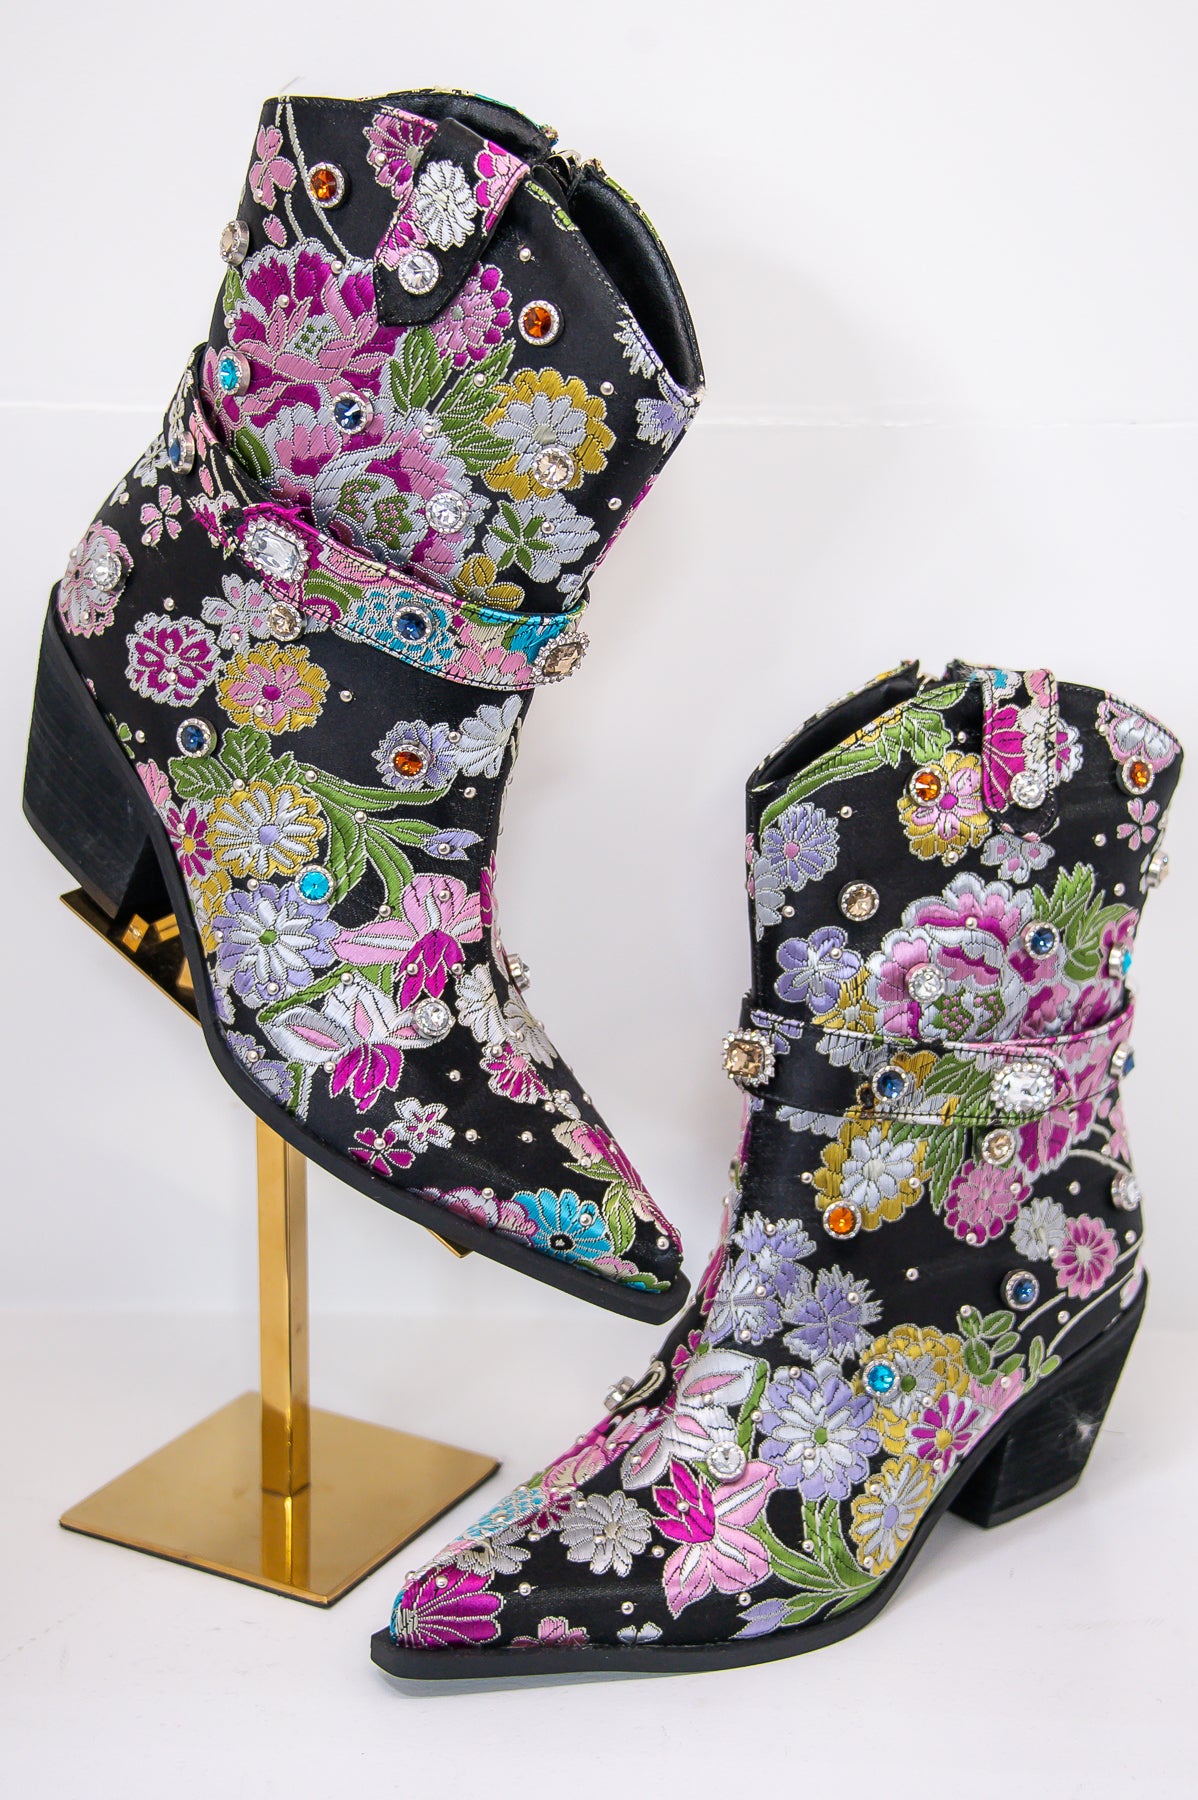 Cowgirls Shimmer And Shine Black/Multi Color Floral Bling Cowgirl Booties - SHO2677BK